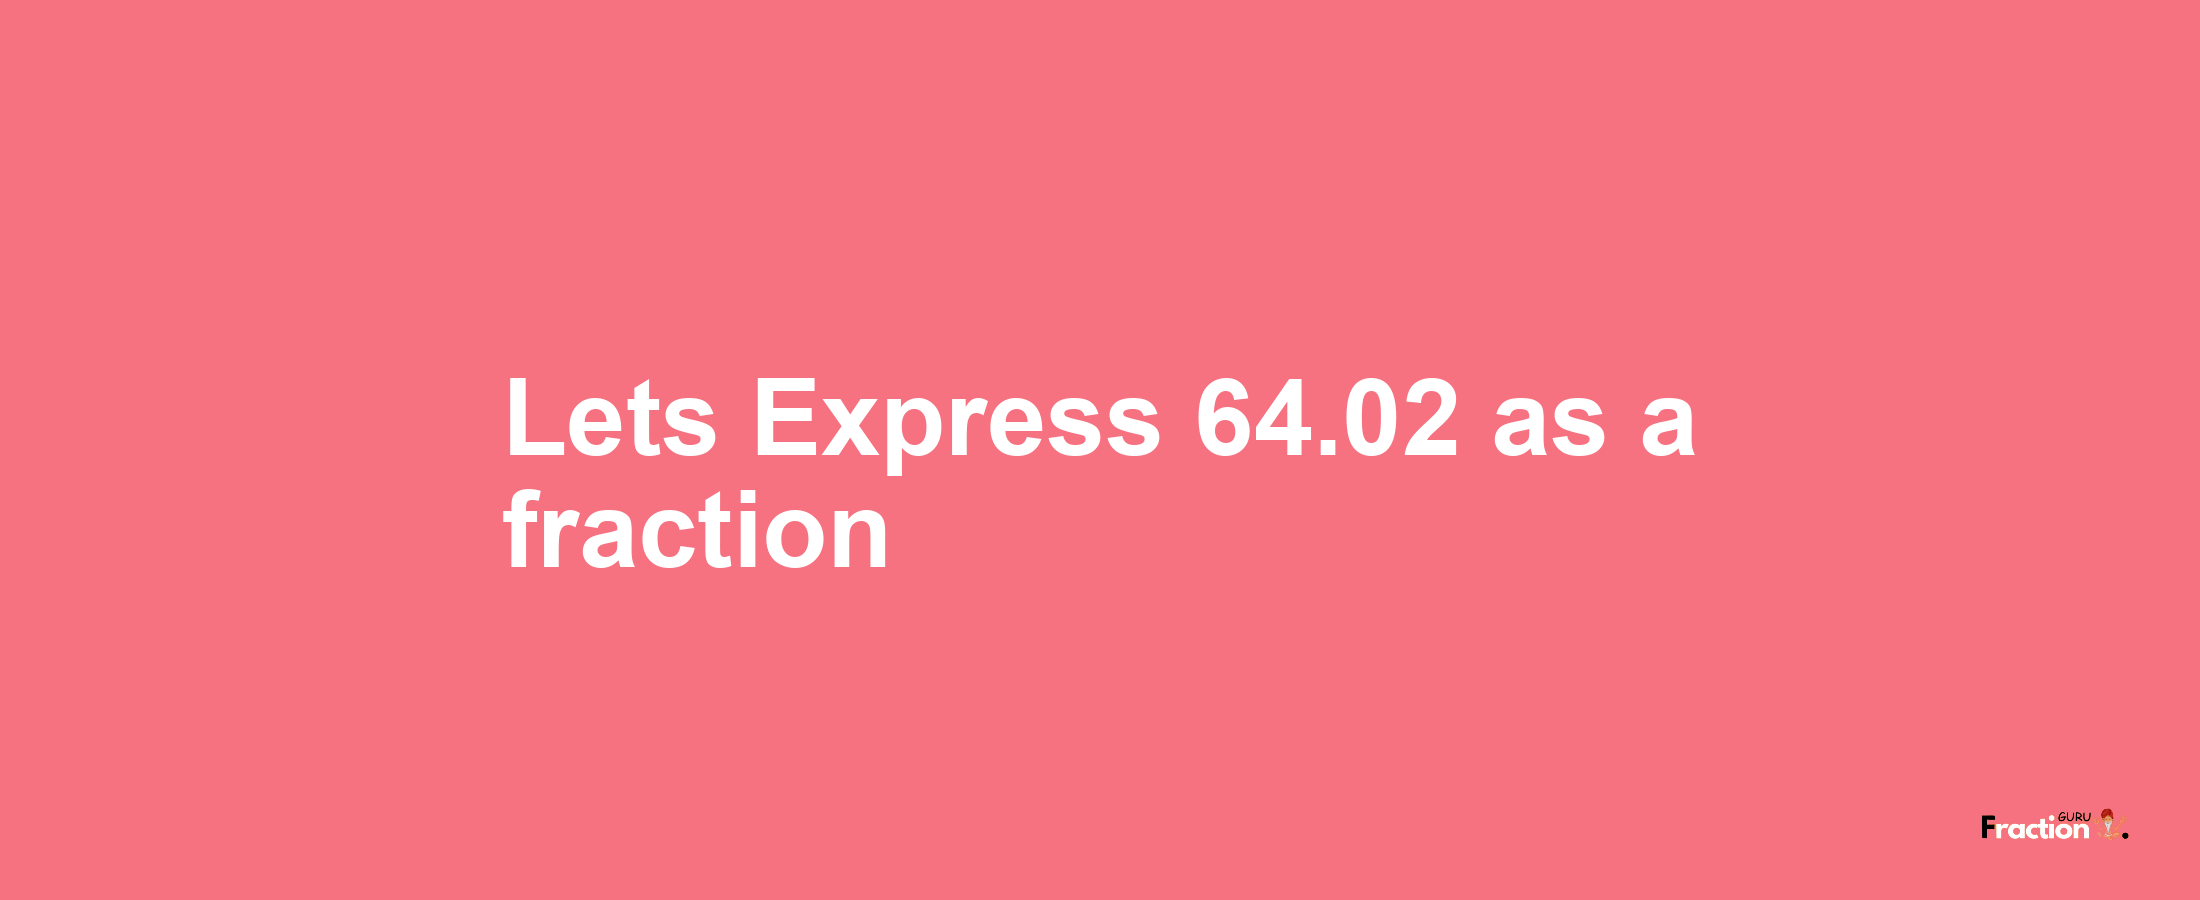 Lets Express 64.02 as afraction